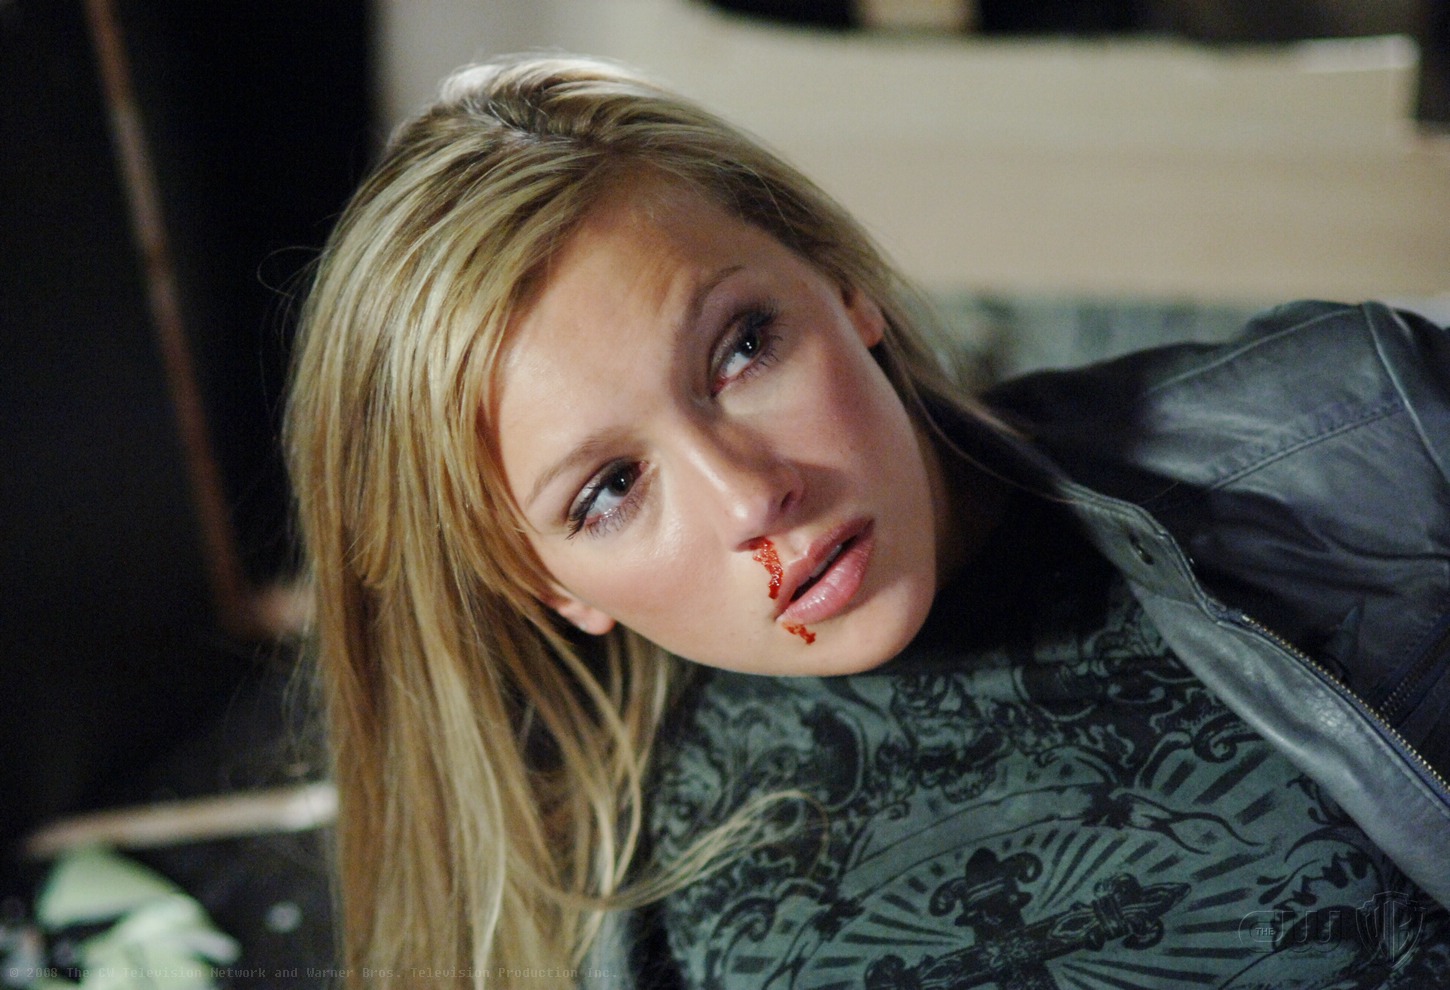 General photo of Katie Cassidy